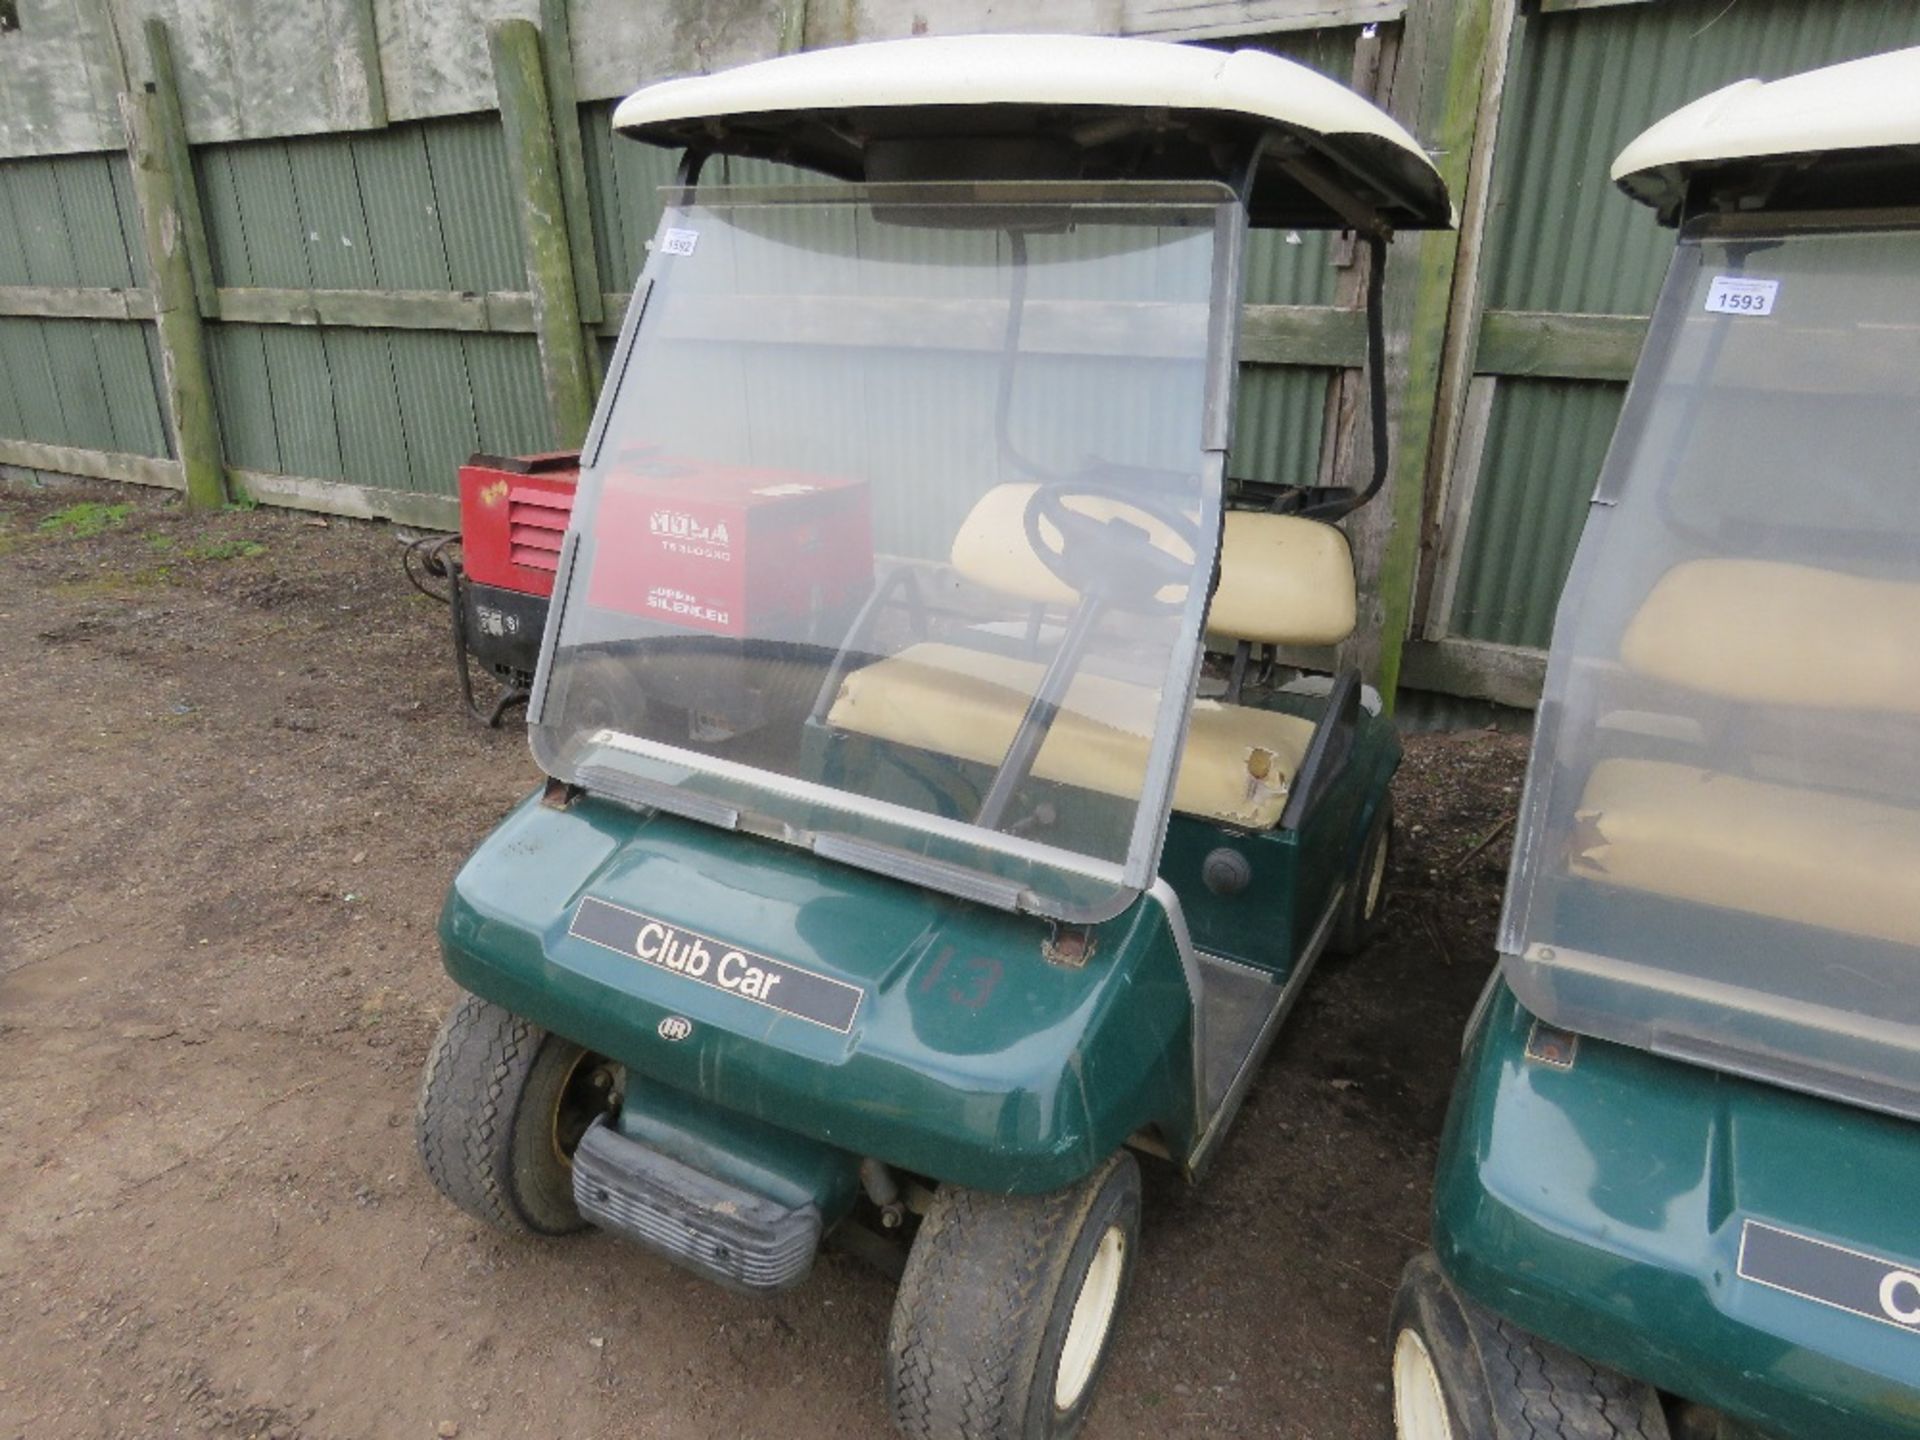 CLUBCAR PETROL ENGINED GOLF CART. BEEN STORED FOR SOME TIME, UNTESTED. - Image 2 of 9